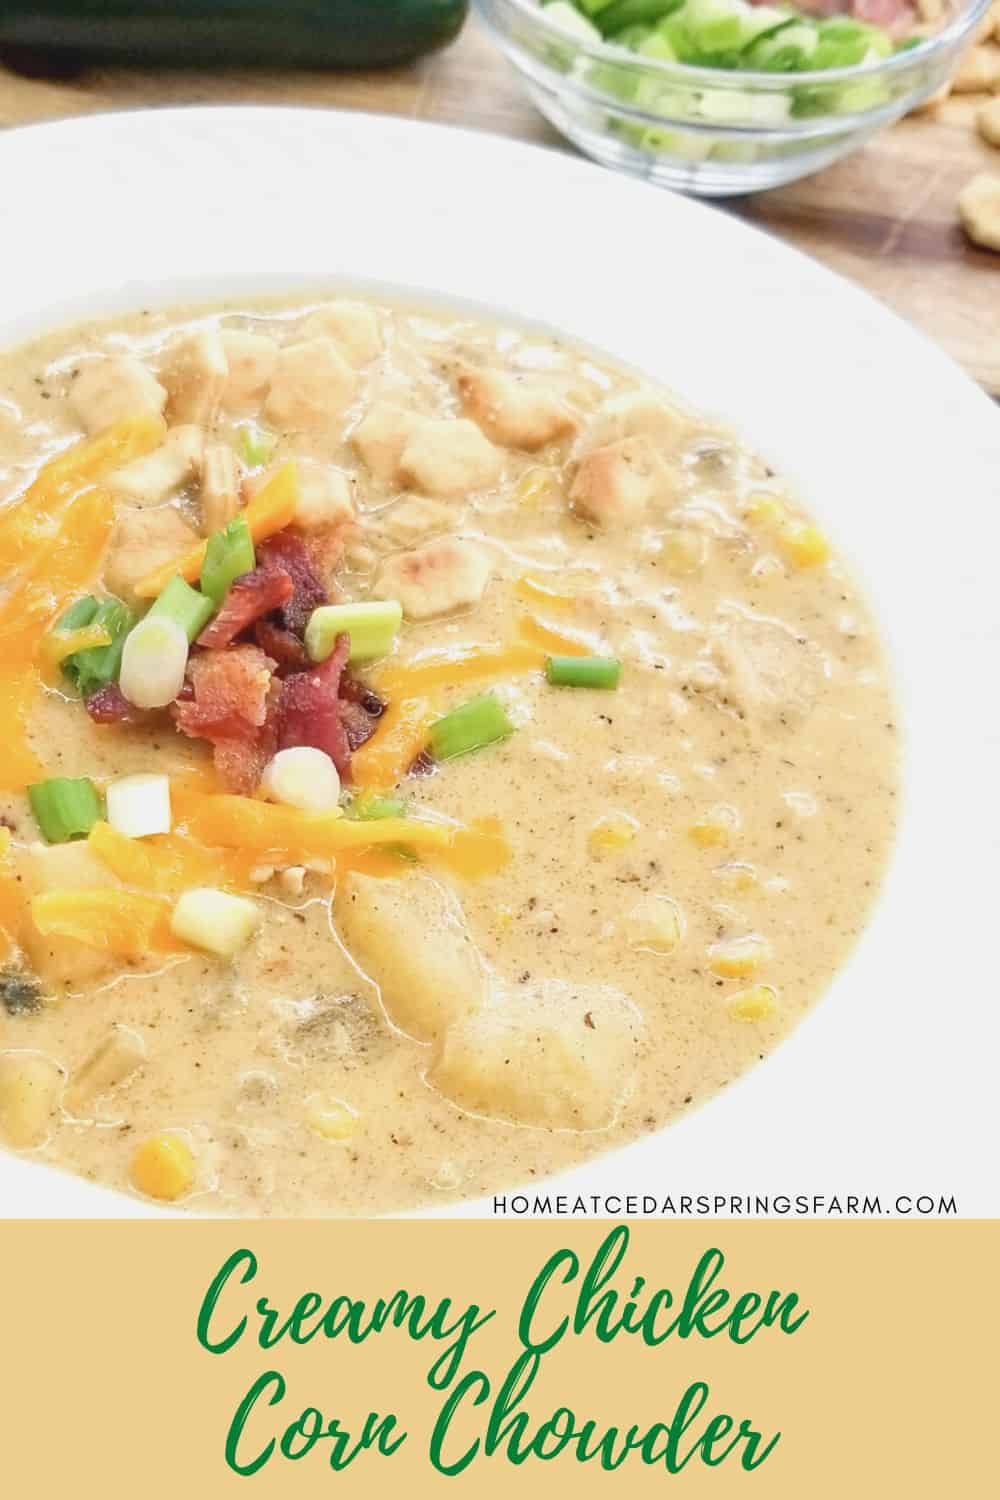 Creamy Chicken Corn Chowder in a white bowl with text overlay.